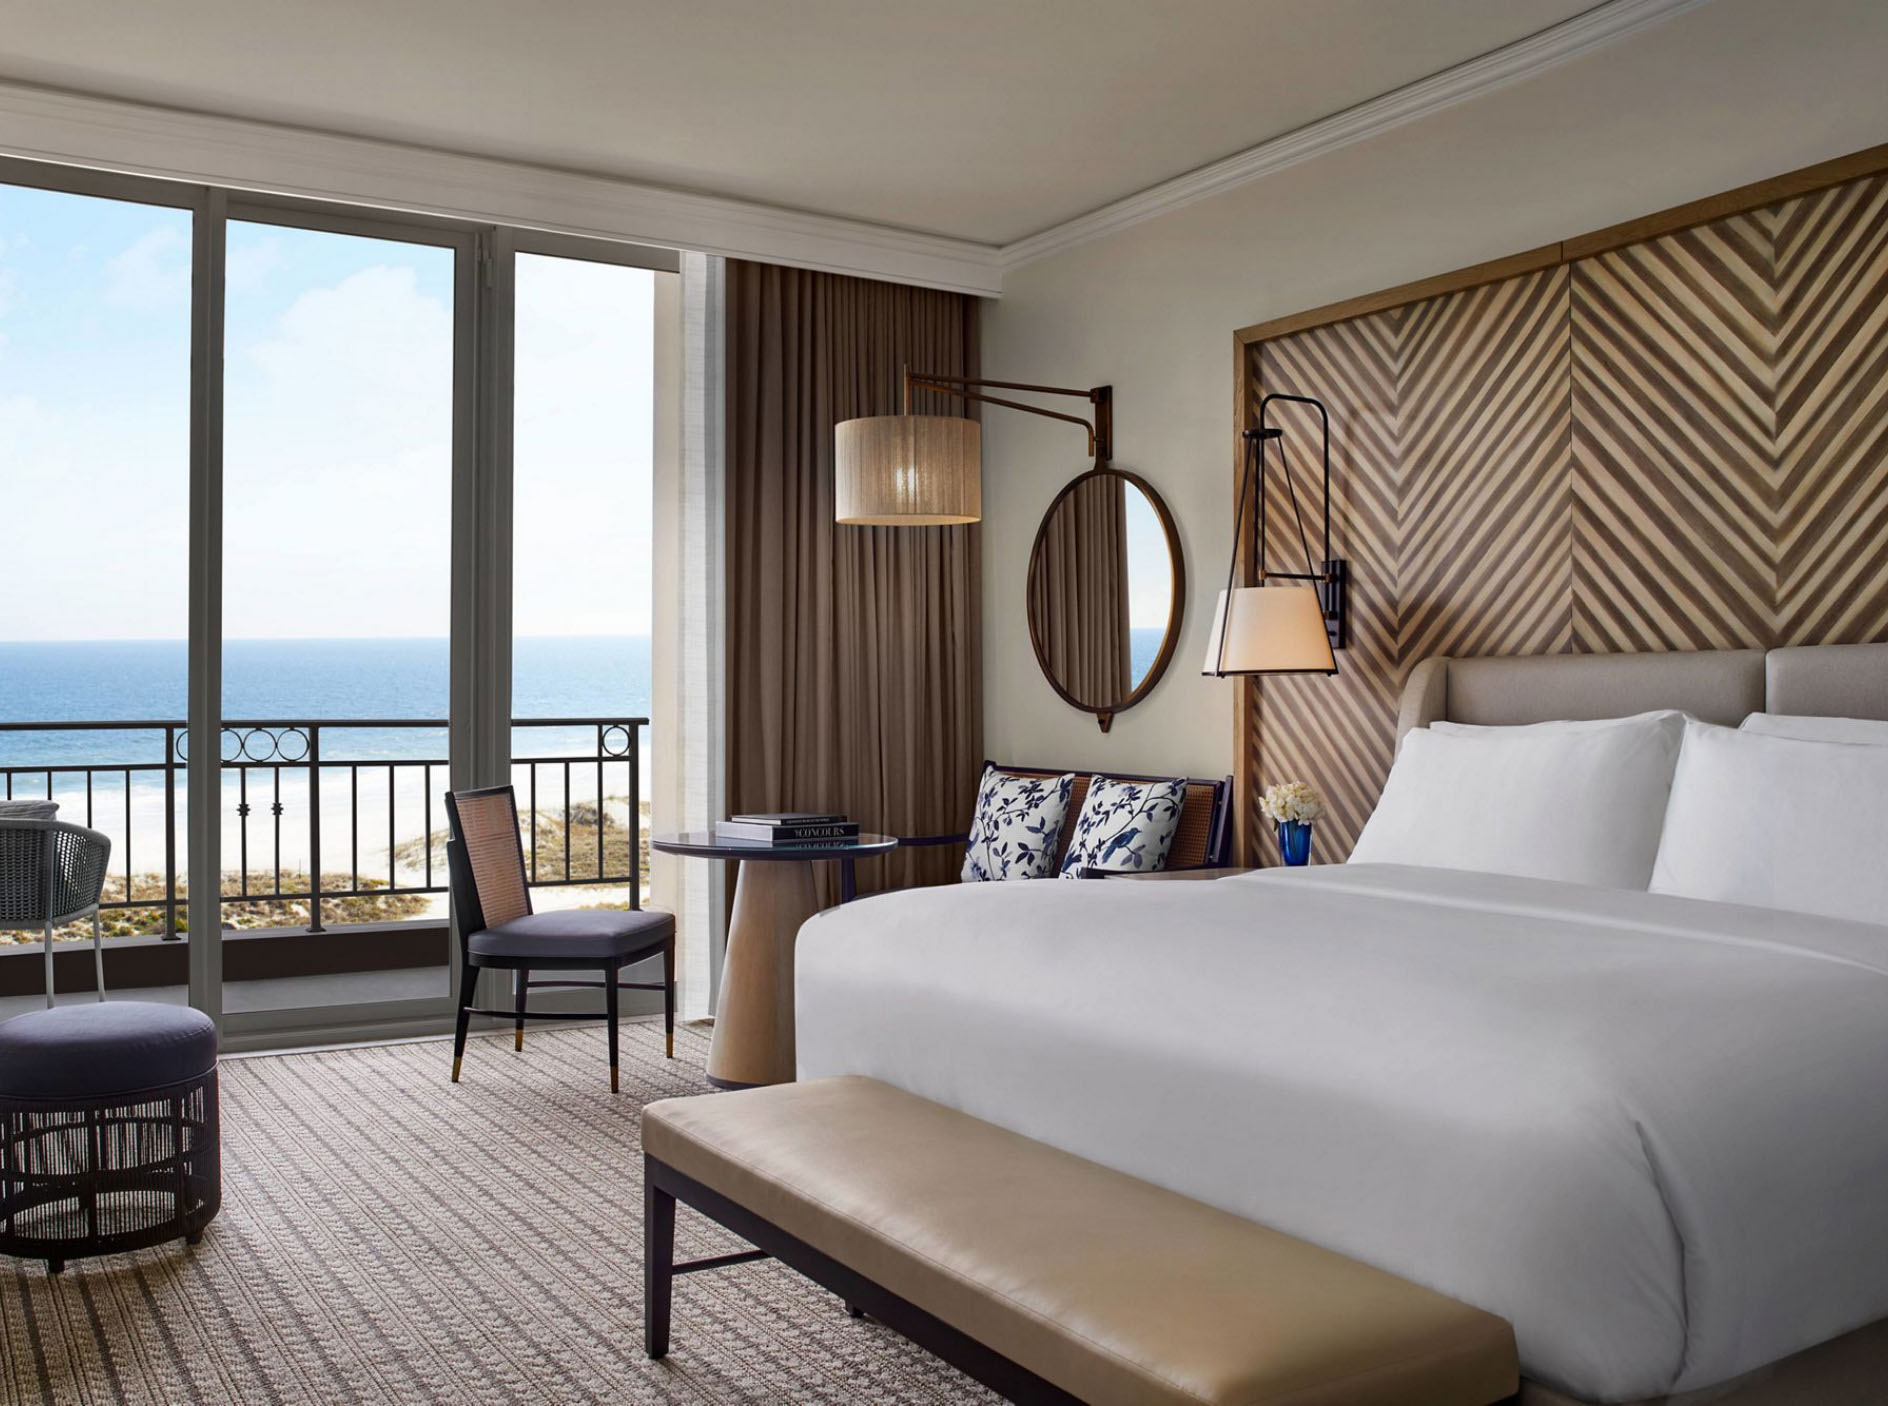 A king room with an ocean view at the amelia island ritz hotel 